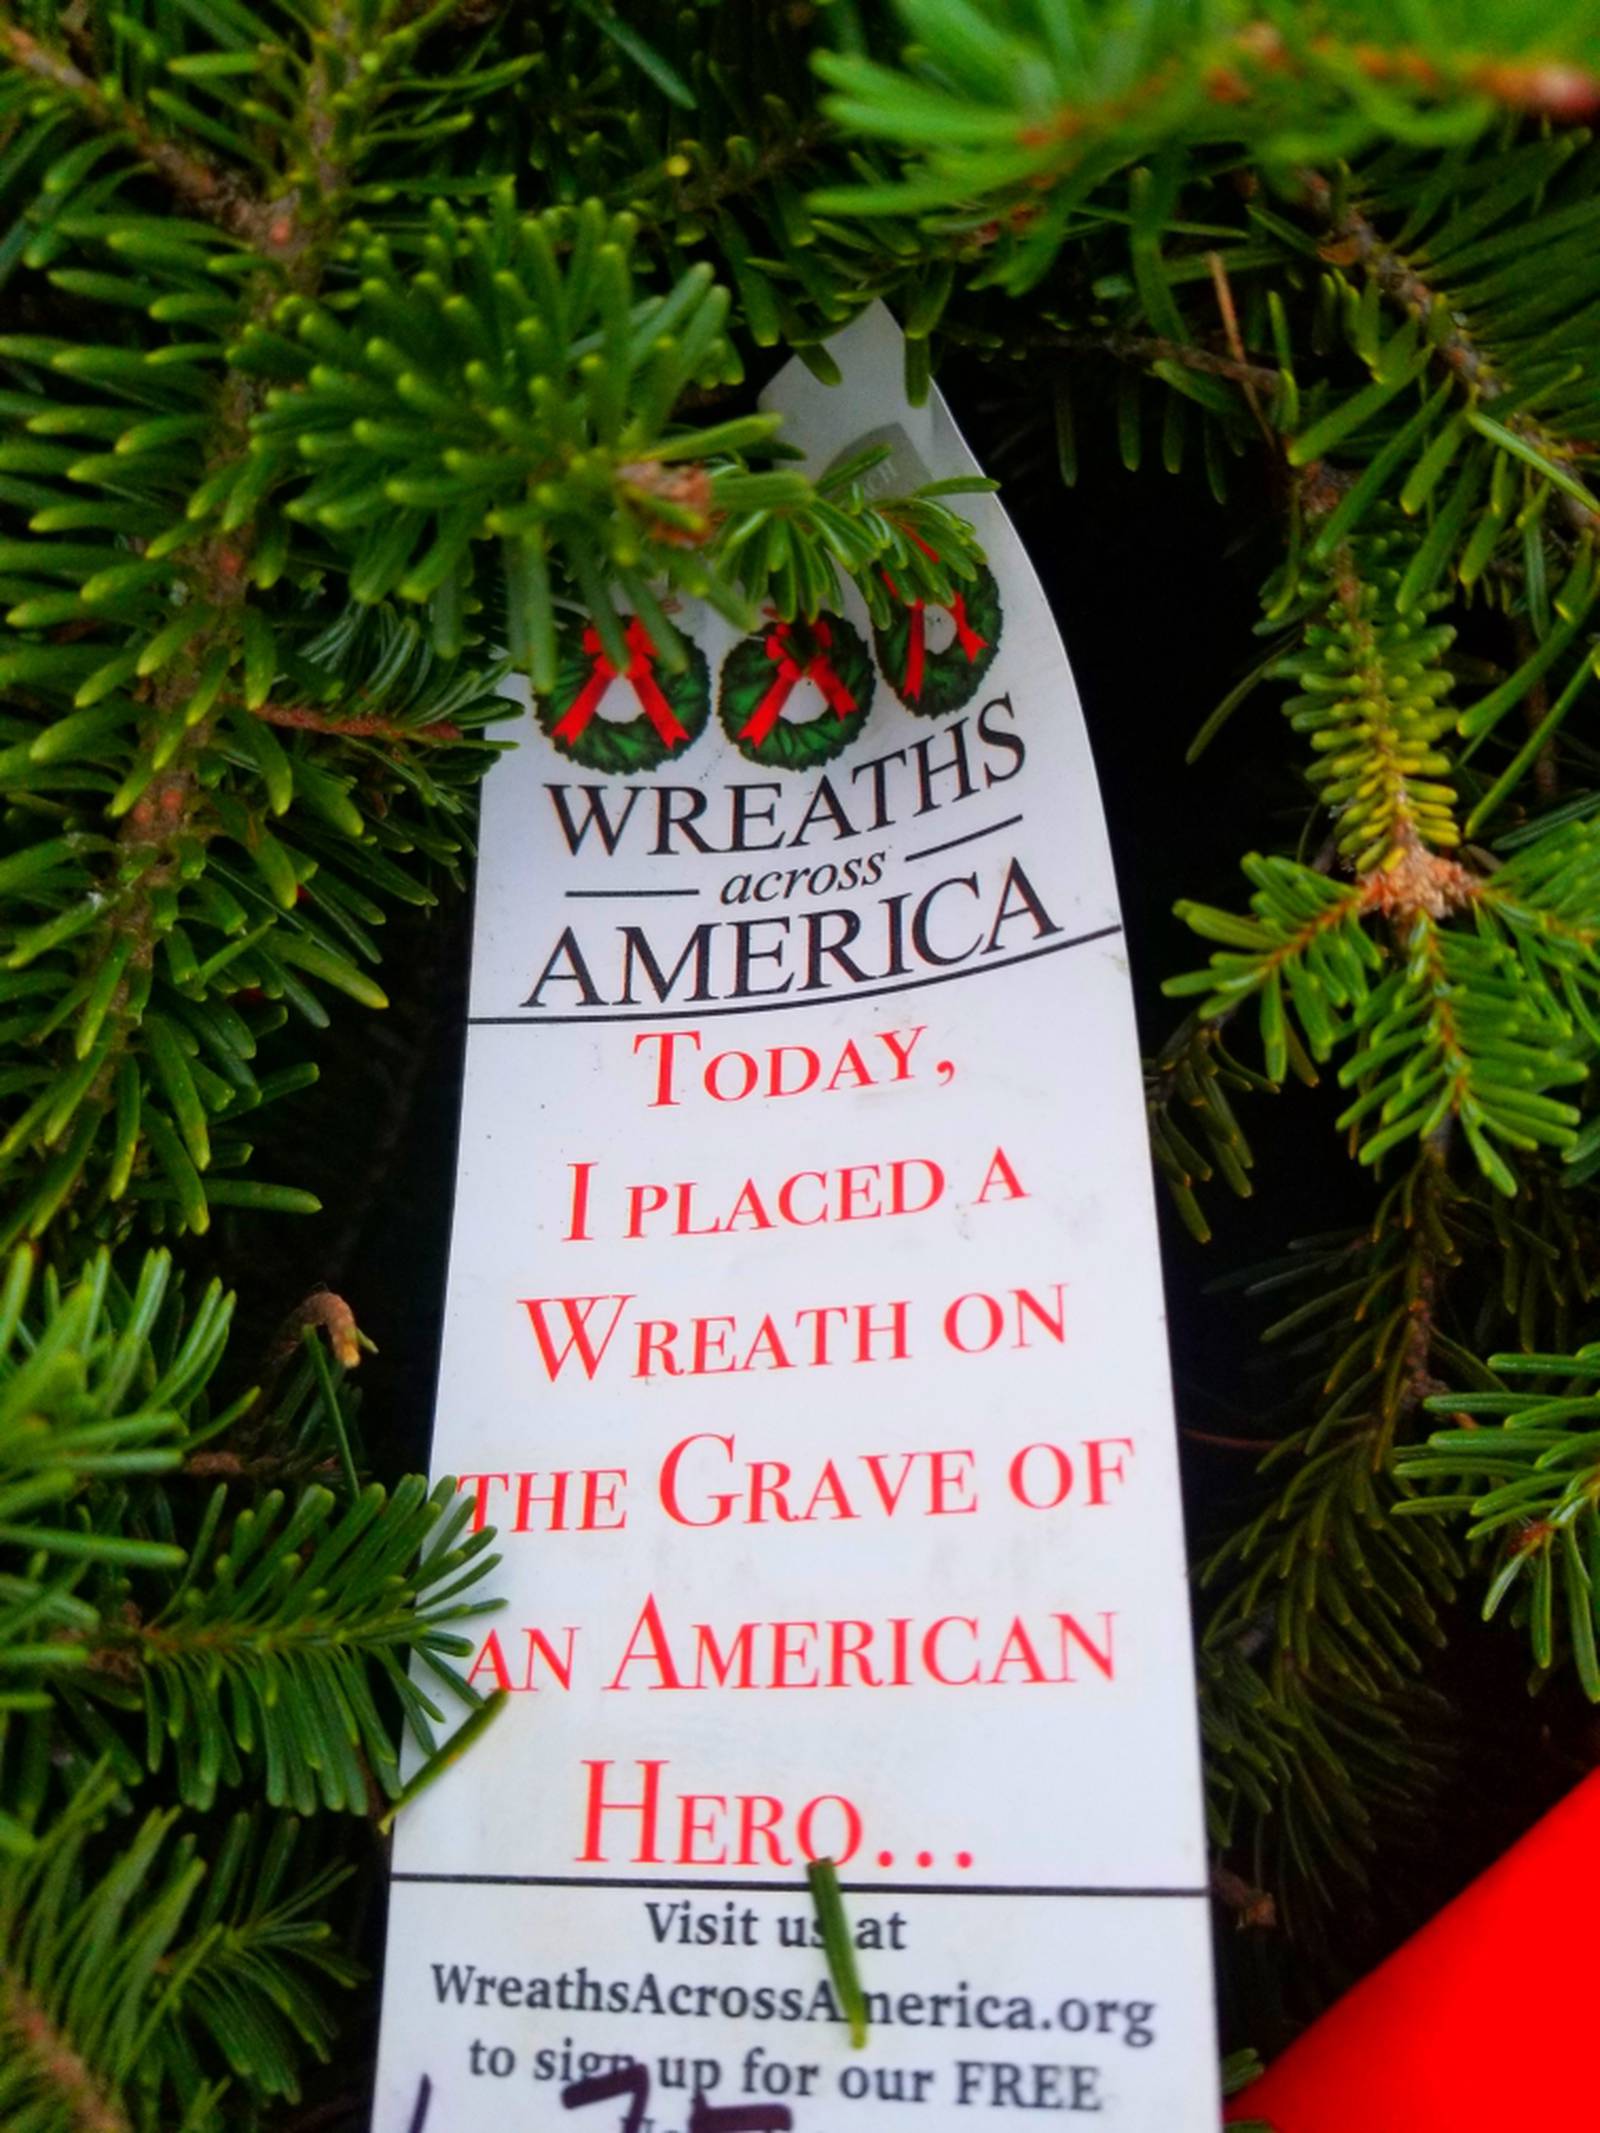 wreaths-across-america-project-marches-on-with-changes-agrinews